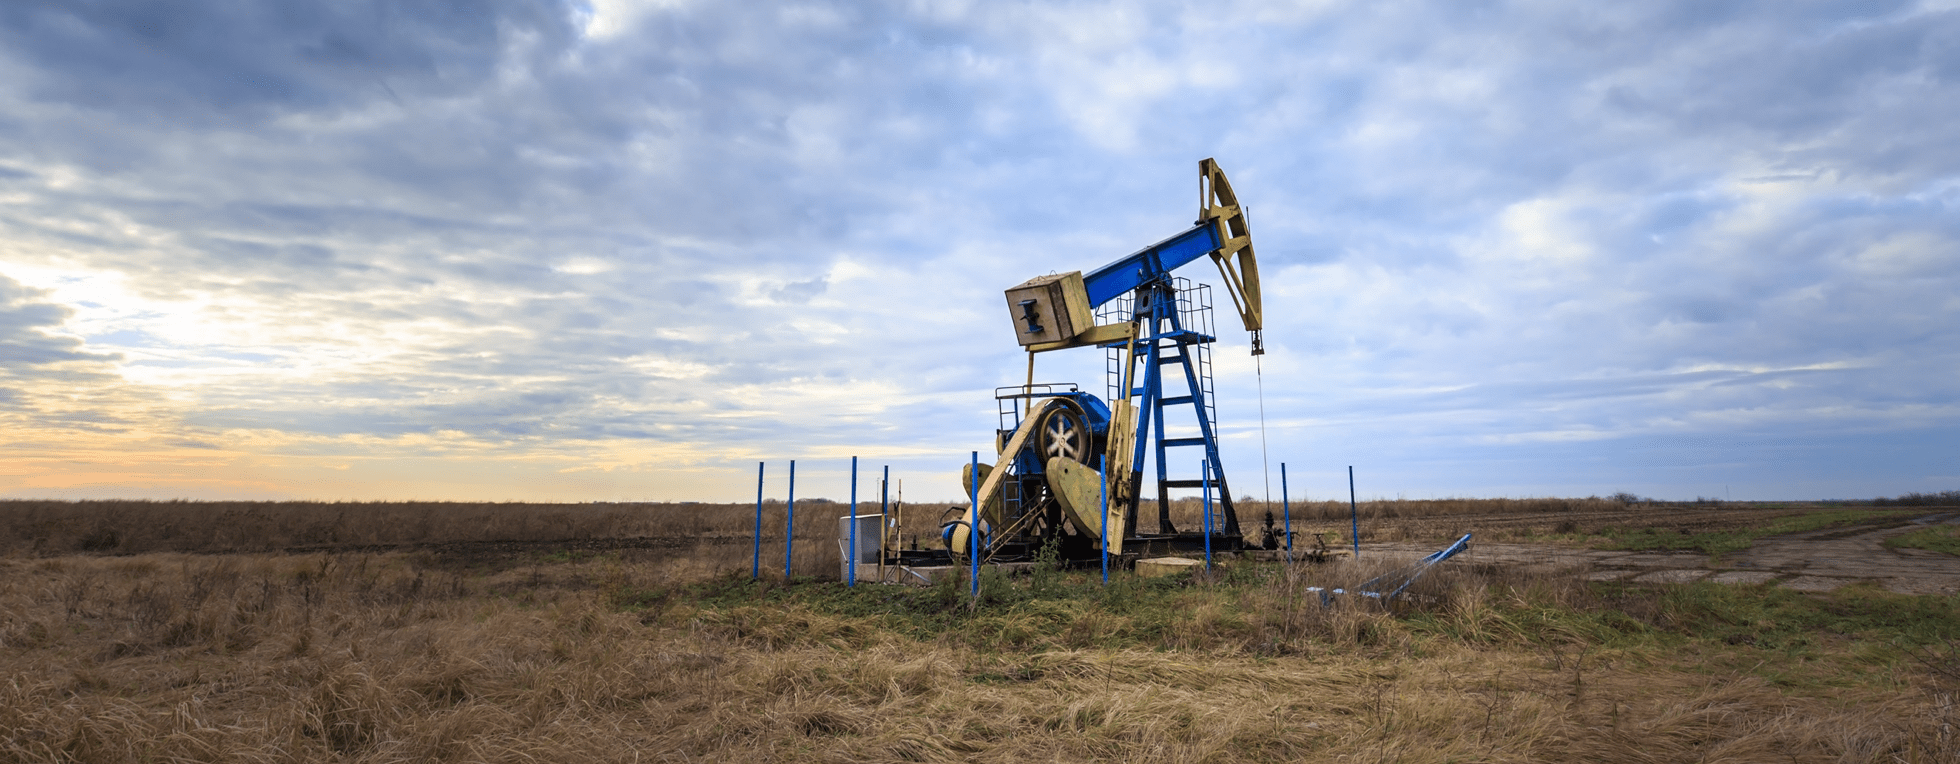 Blackfoot Drilling License Reinstated